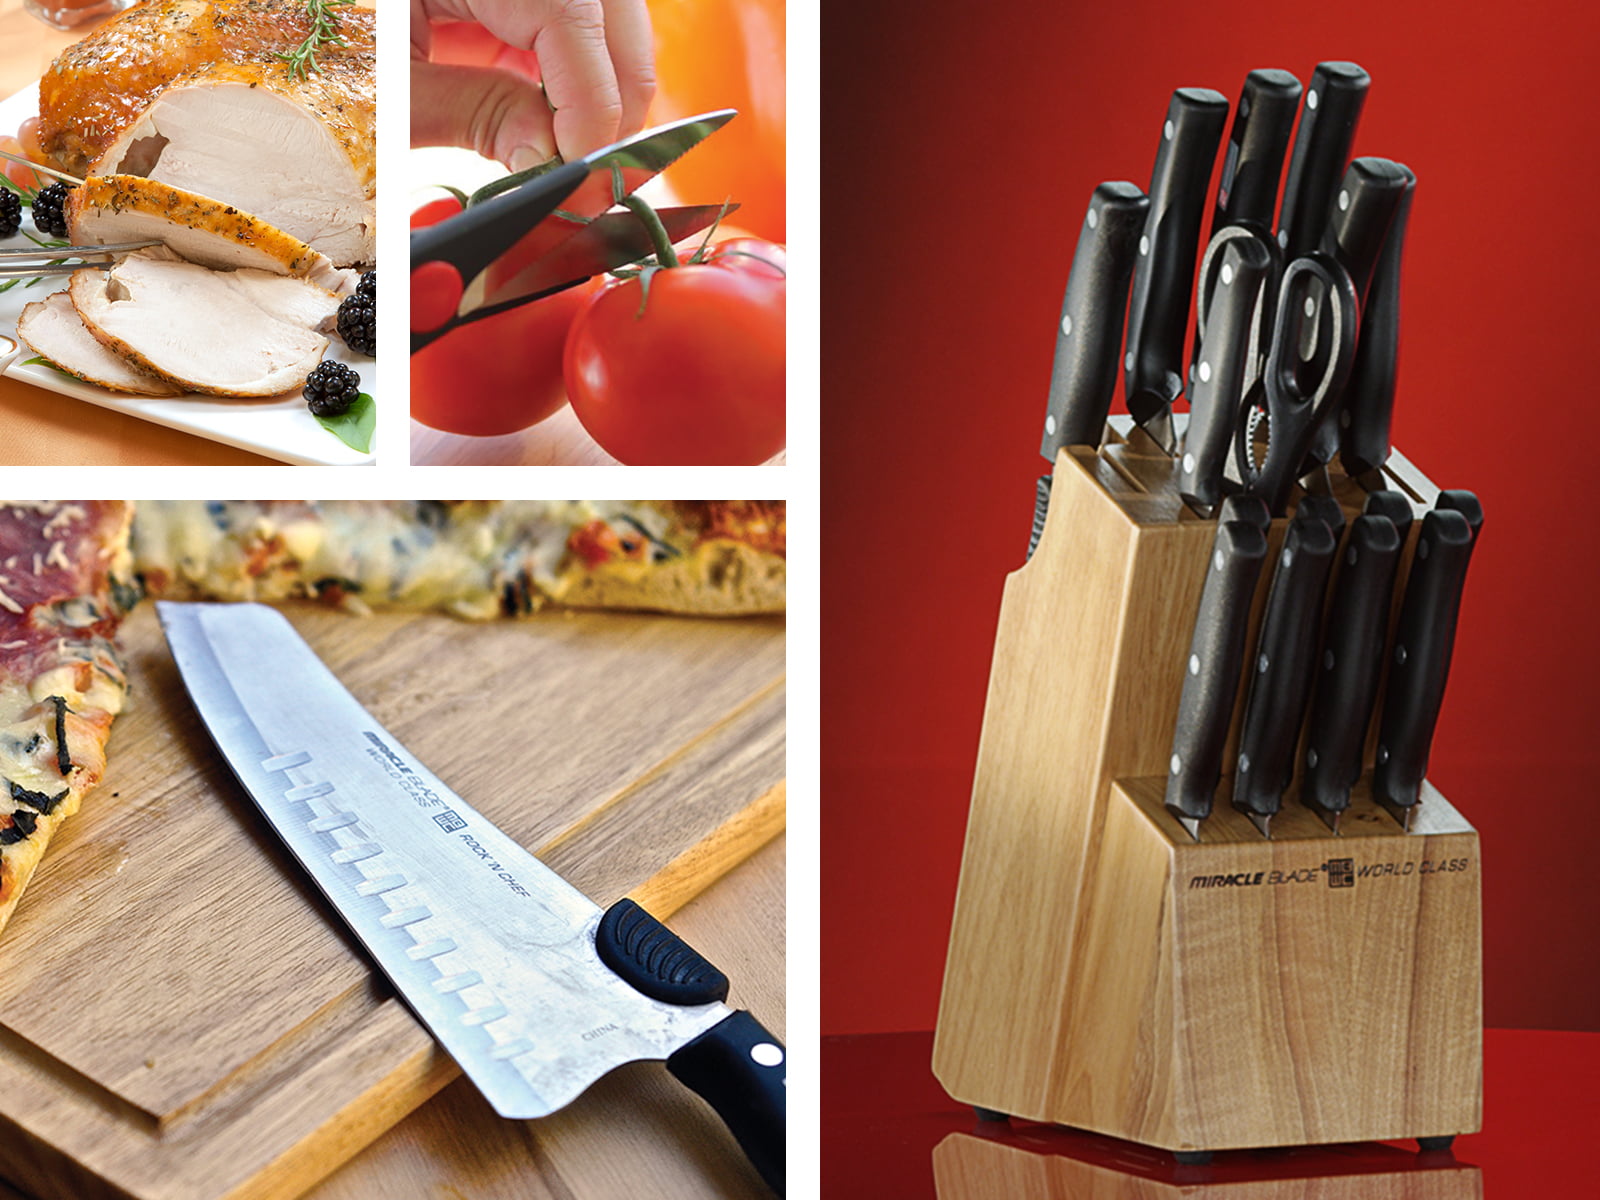 Miracle Blade World Class 18 Piece Knife Set, Kitchen Knives with Wood Block